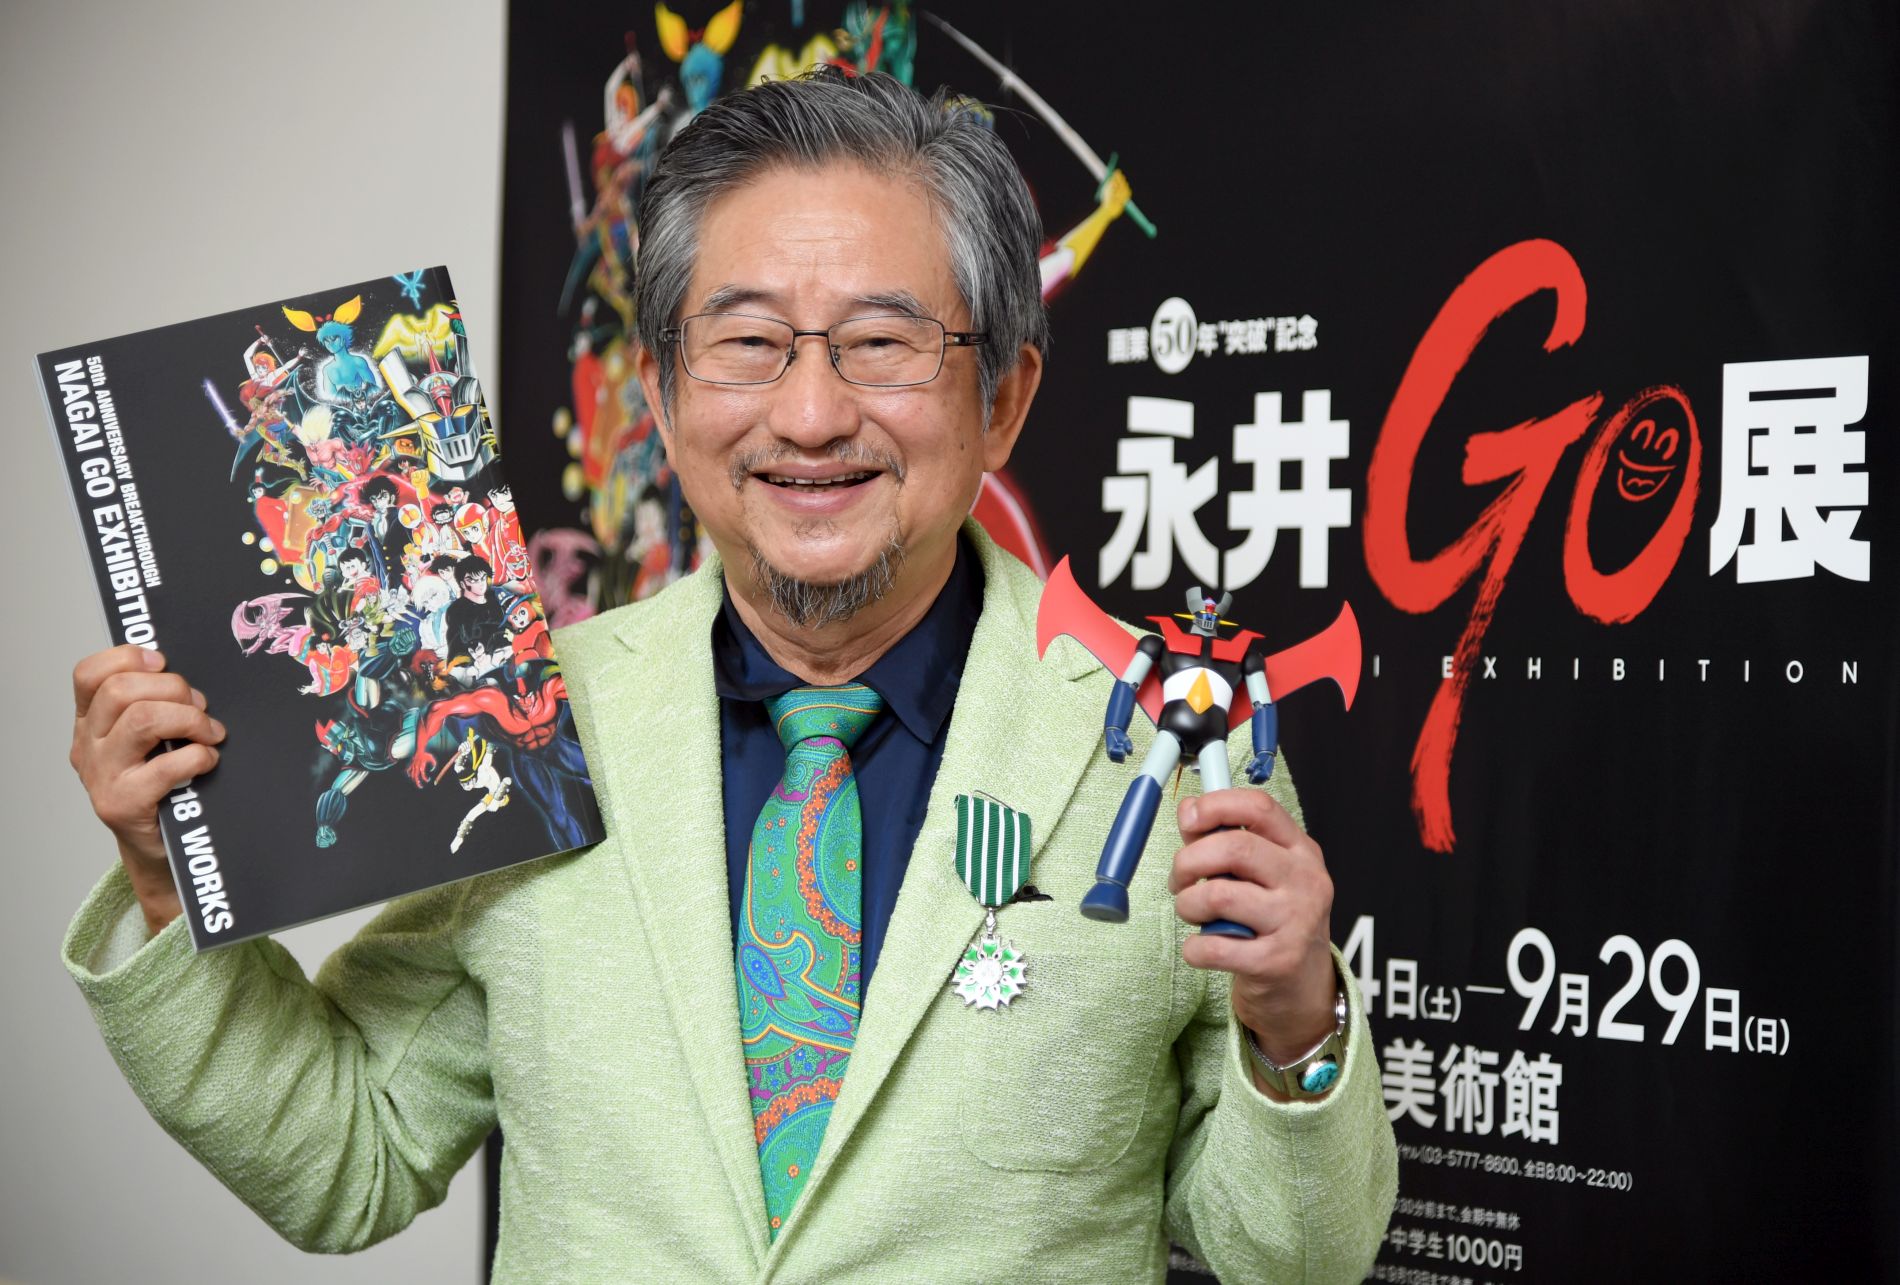 ‘50 Years of Go Nagai’ Exhibit Coming to the Ueno Royal Museum in September 2019